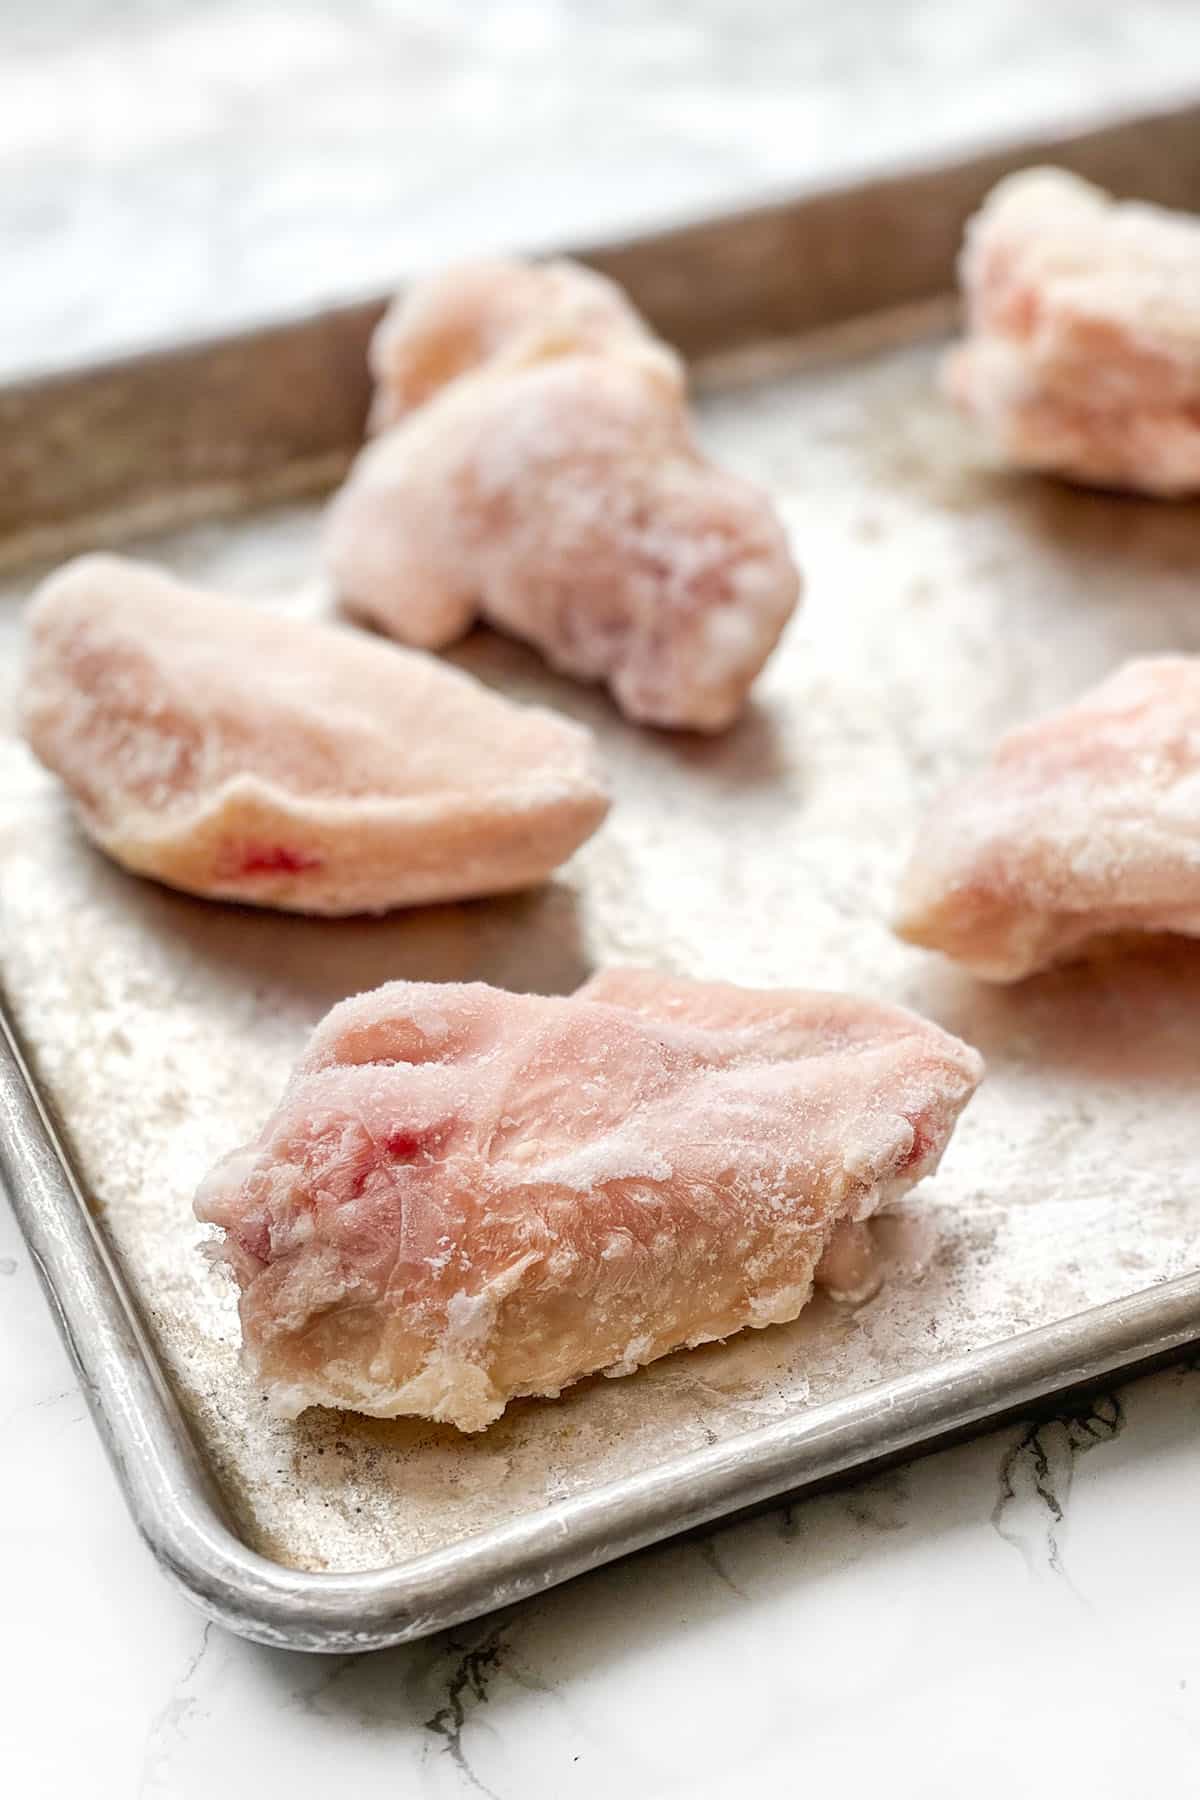 Can you Cook Chicken Wings from Frozen?